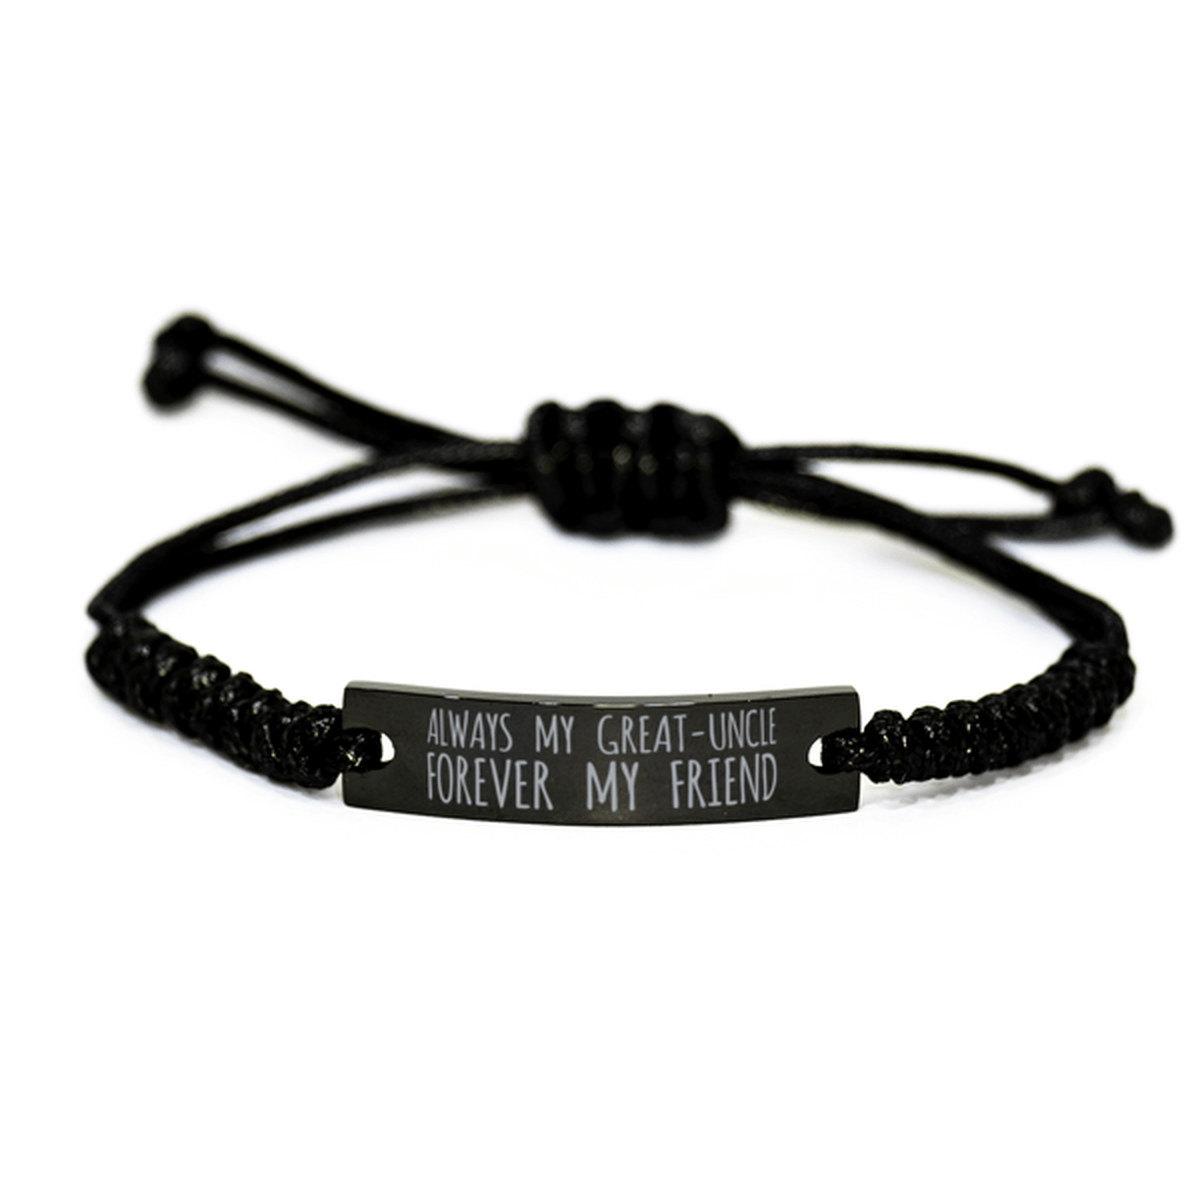 Inspirational Great Uncle1 Black Rope Bracelet, Always My Great Uncle1 Forever My Friend, Best Birthday Gifts For Family